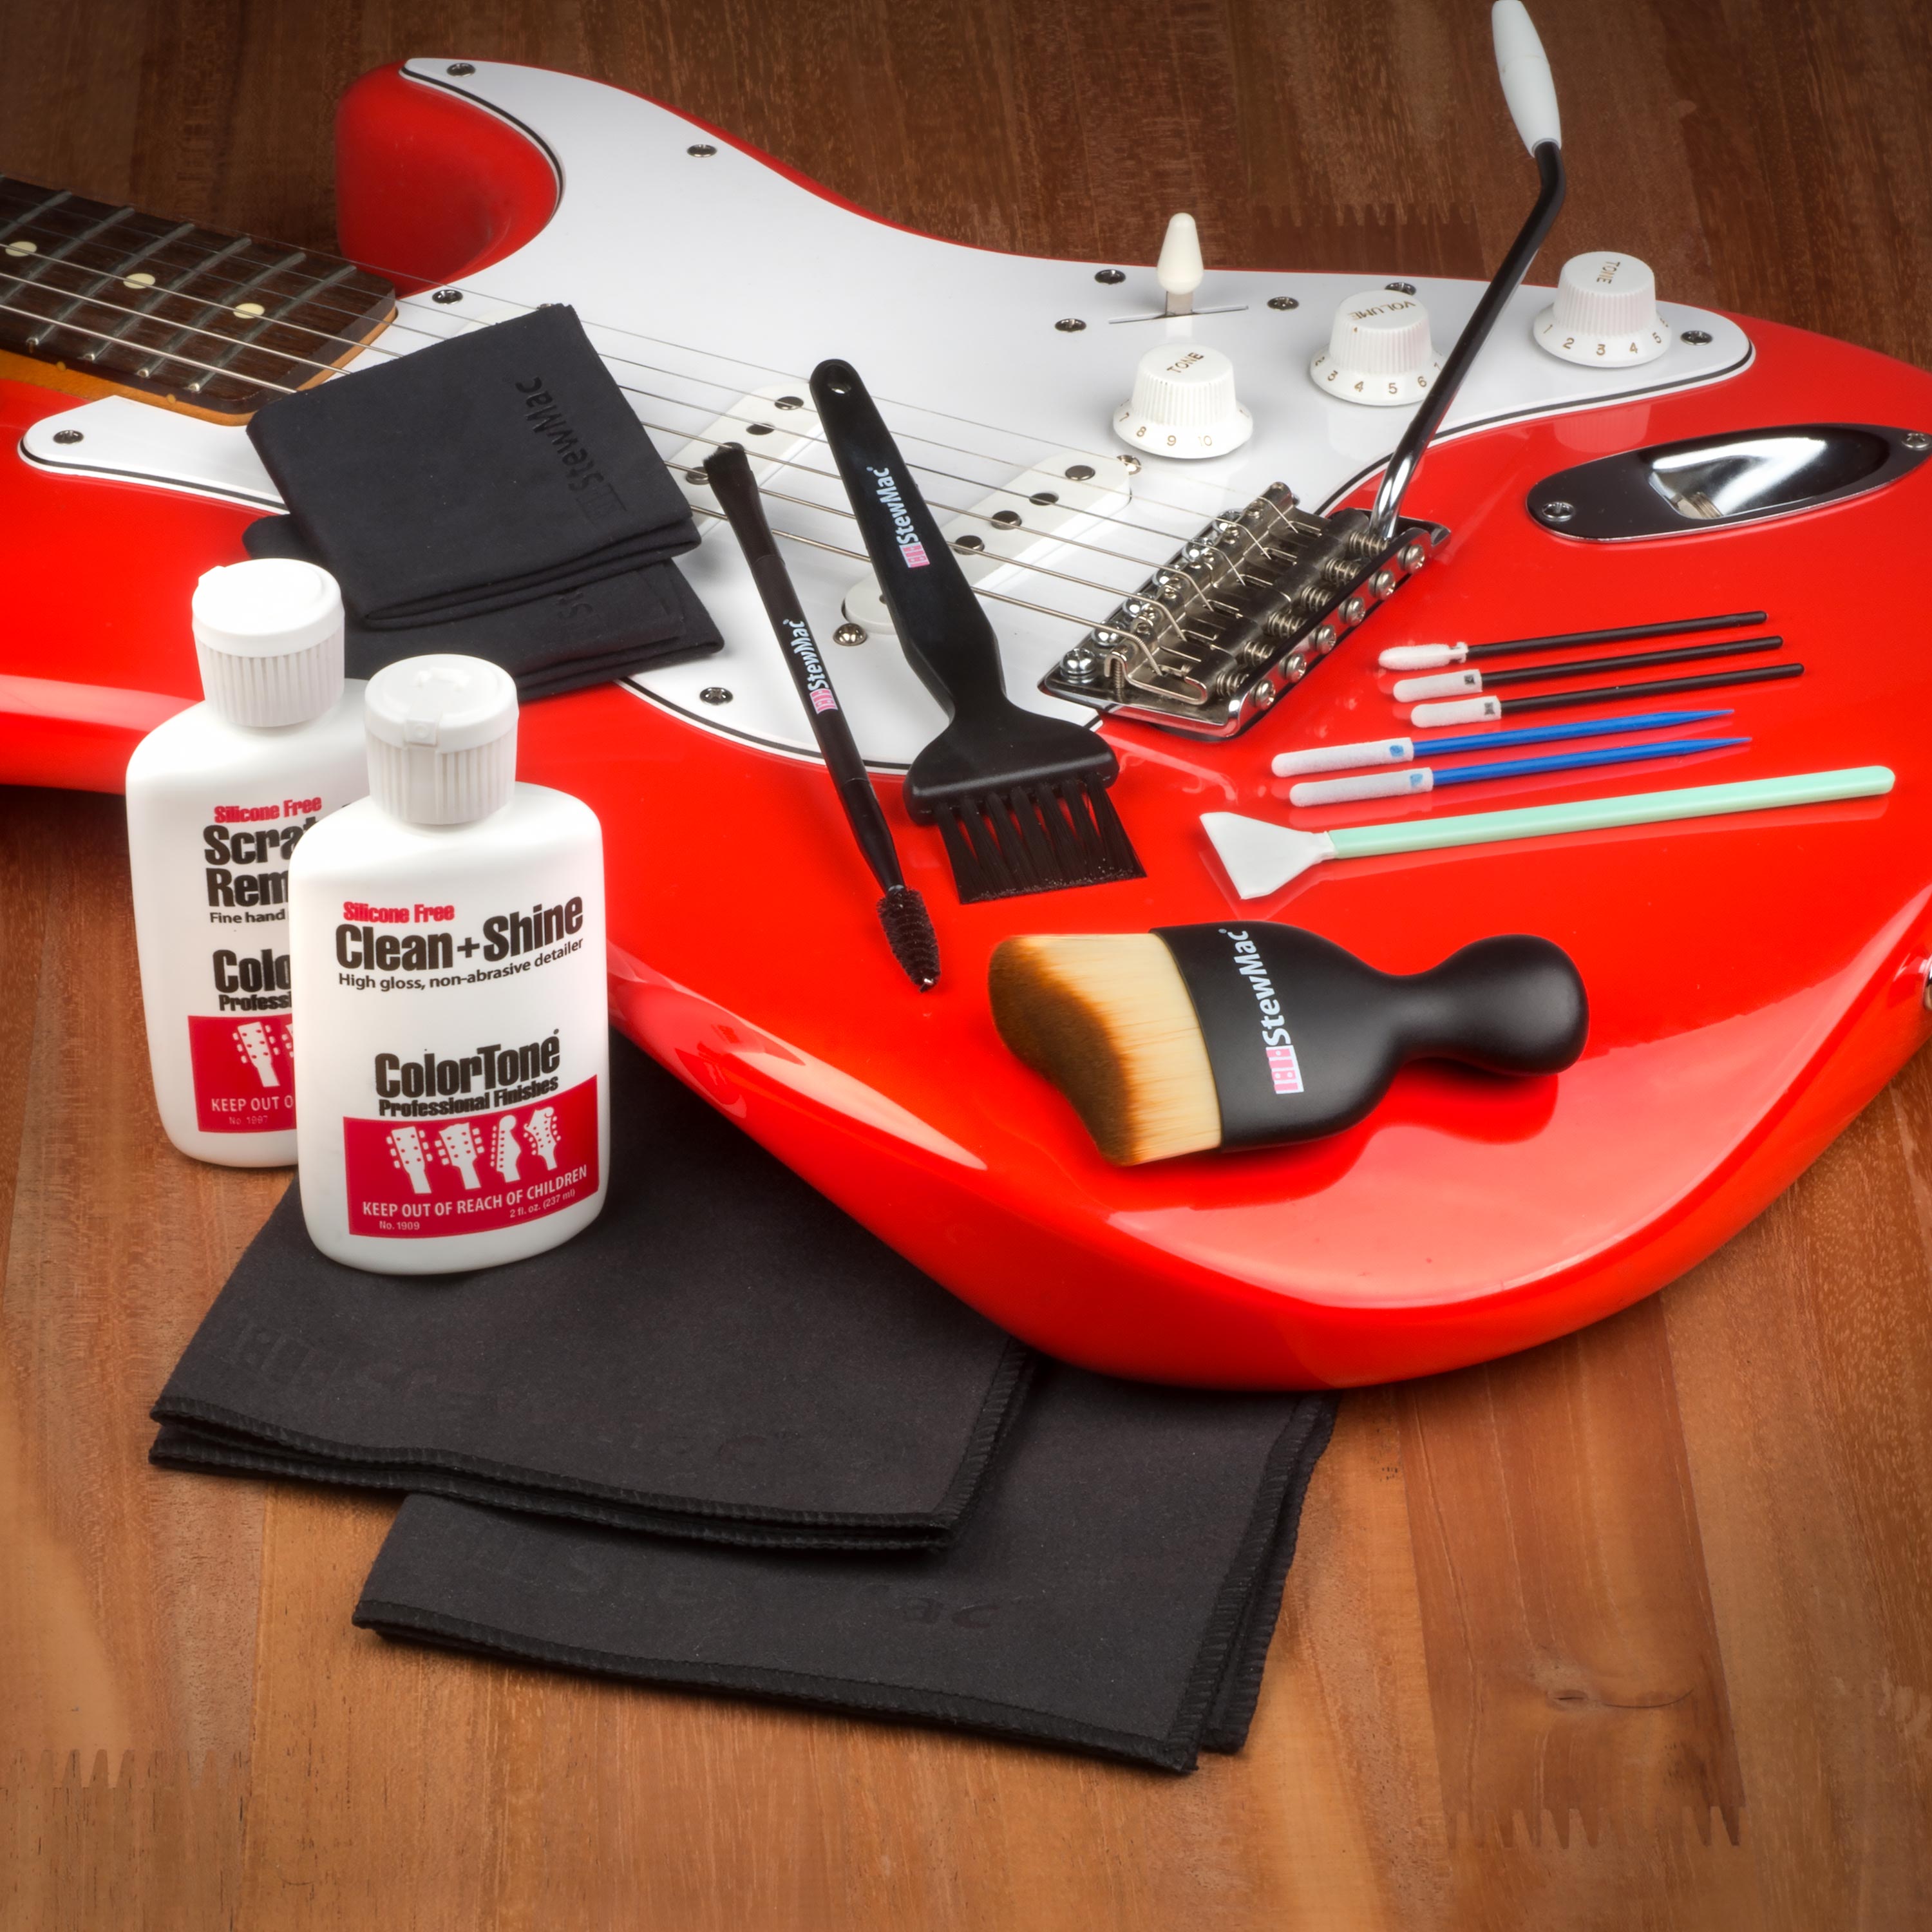 StewMac Guitar Cleaning Tool Set